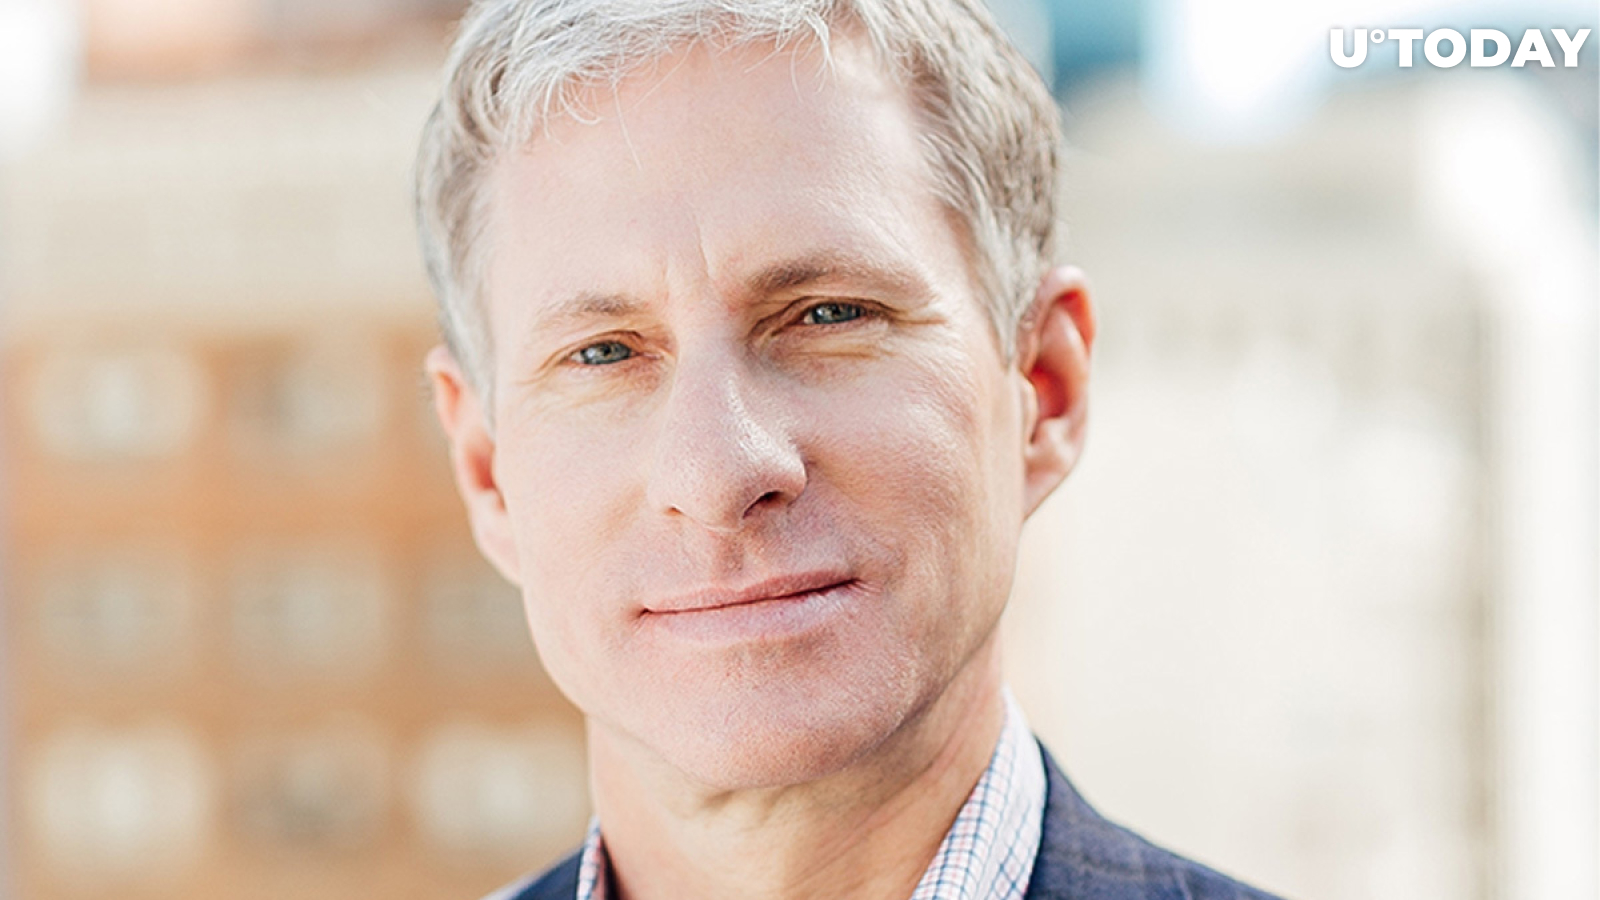 Ripple Is Close to Moving Out of U.S., Says Former CEO Chris Larsen